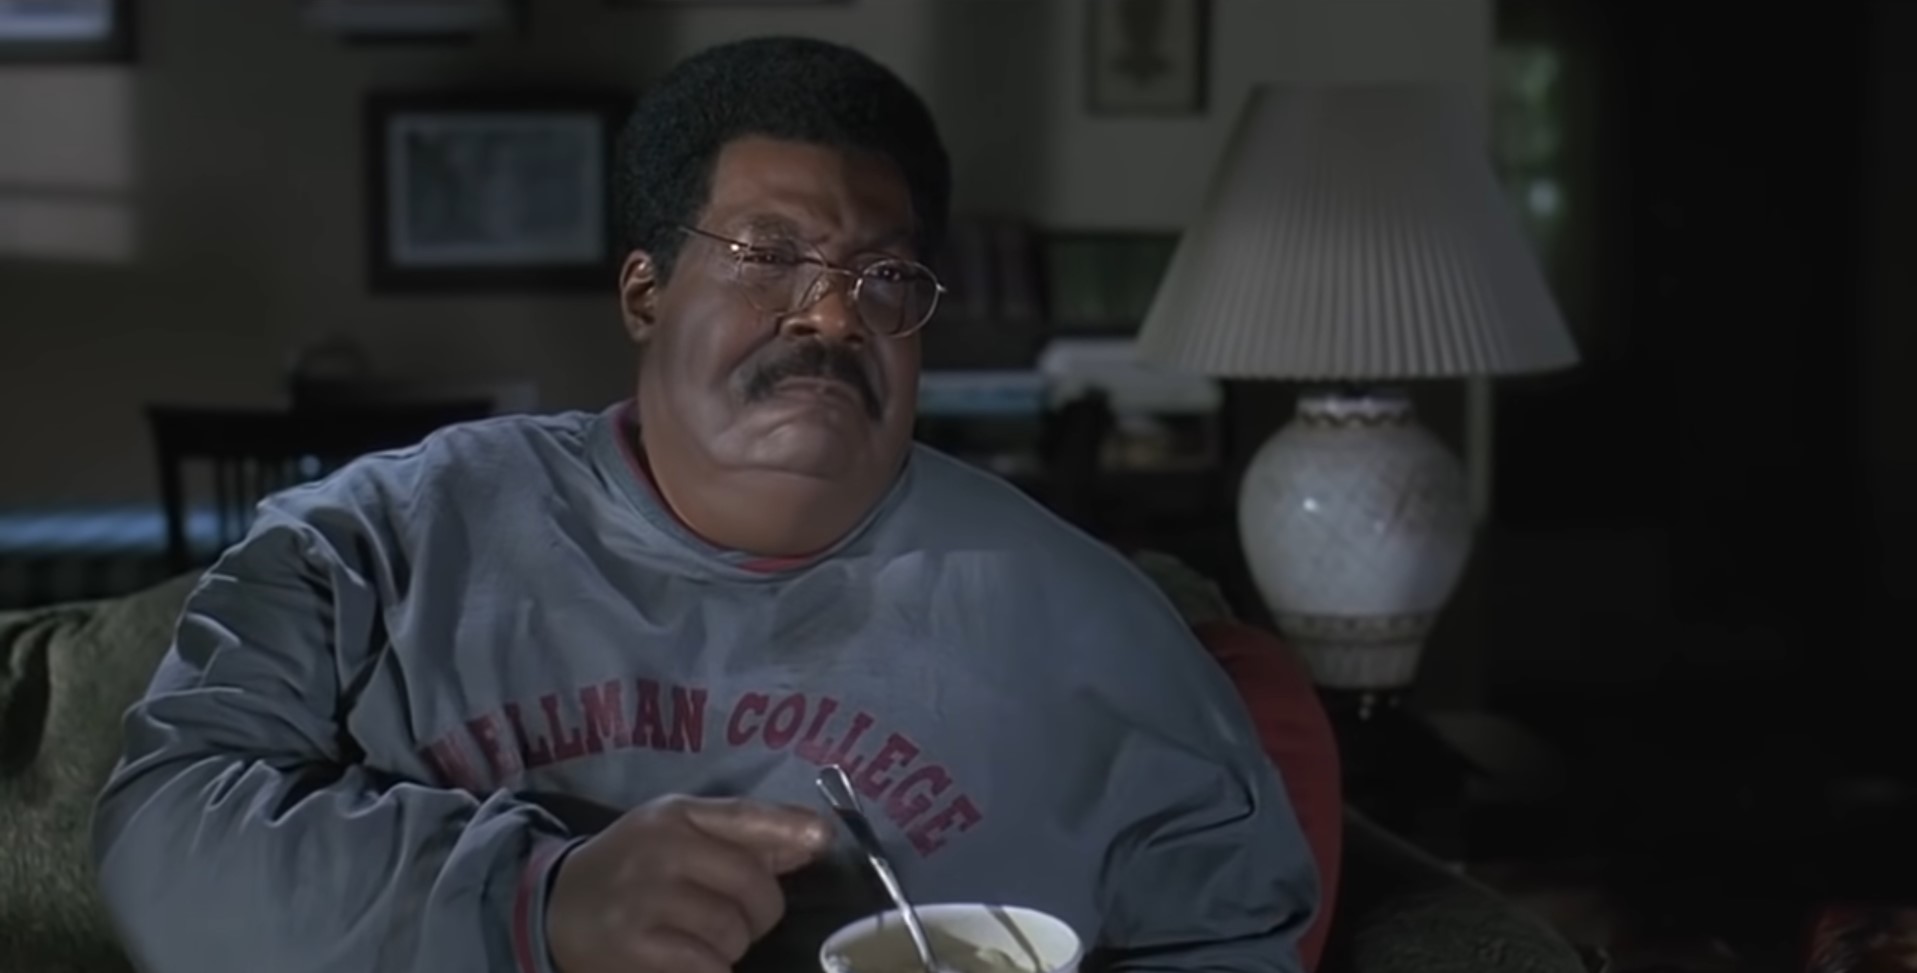 Is The Nutty Professor Based on a True Story?